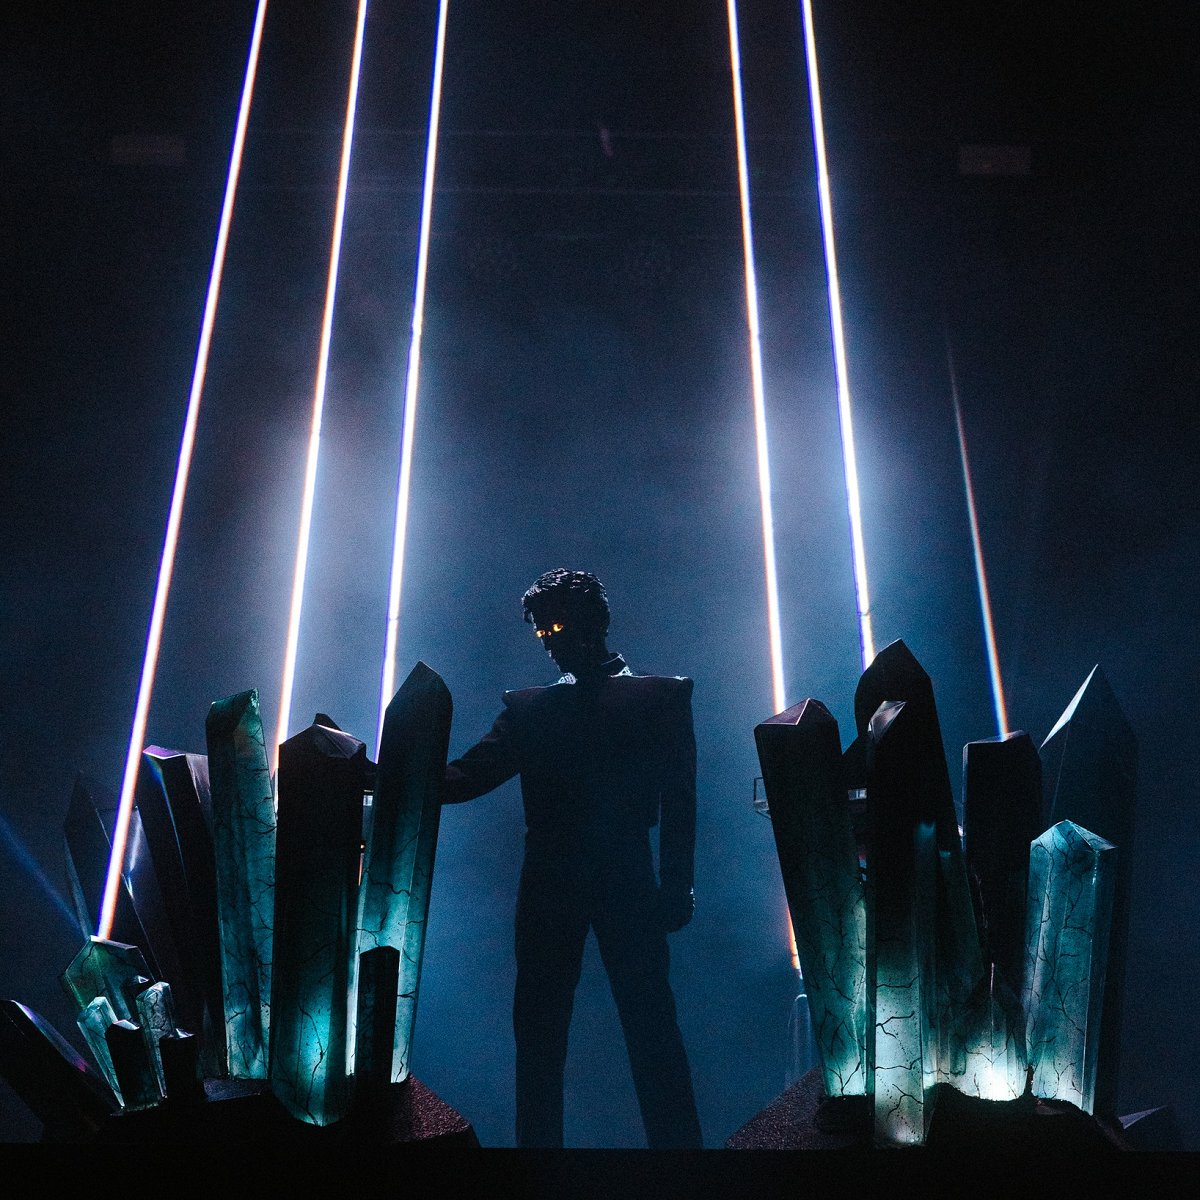 French electronic artist Gesaffelstein will return to Los Angeles on Friday, November 8 to headline a show at the Kia Forum in Inglewood!

Presale tickets go on sale on Thursday at 9 a.m. PT. Get the code here: bit.ly/4b6aExE

#gesaffelstein #thekiaforum #justannounced